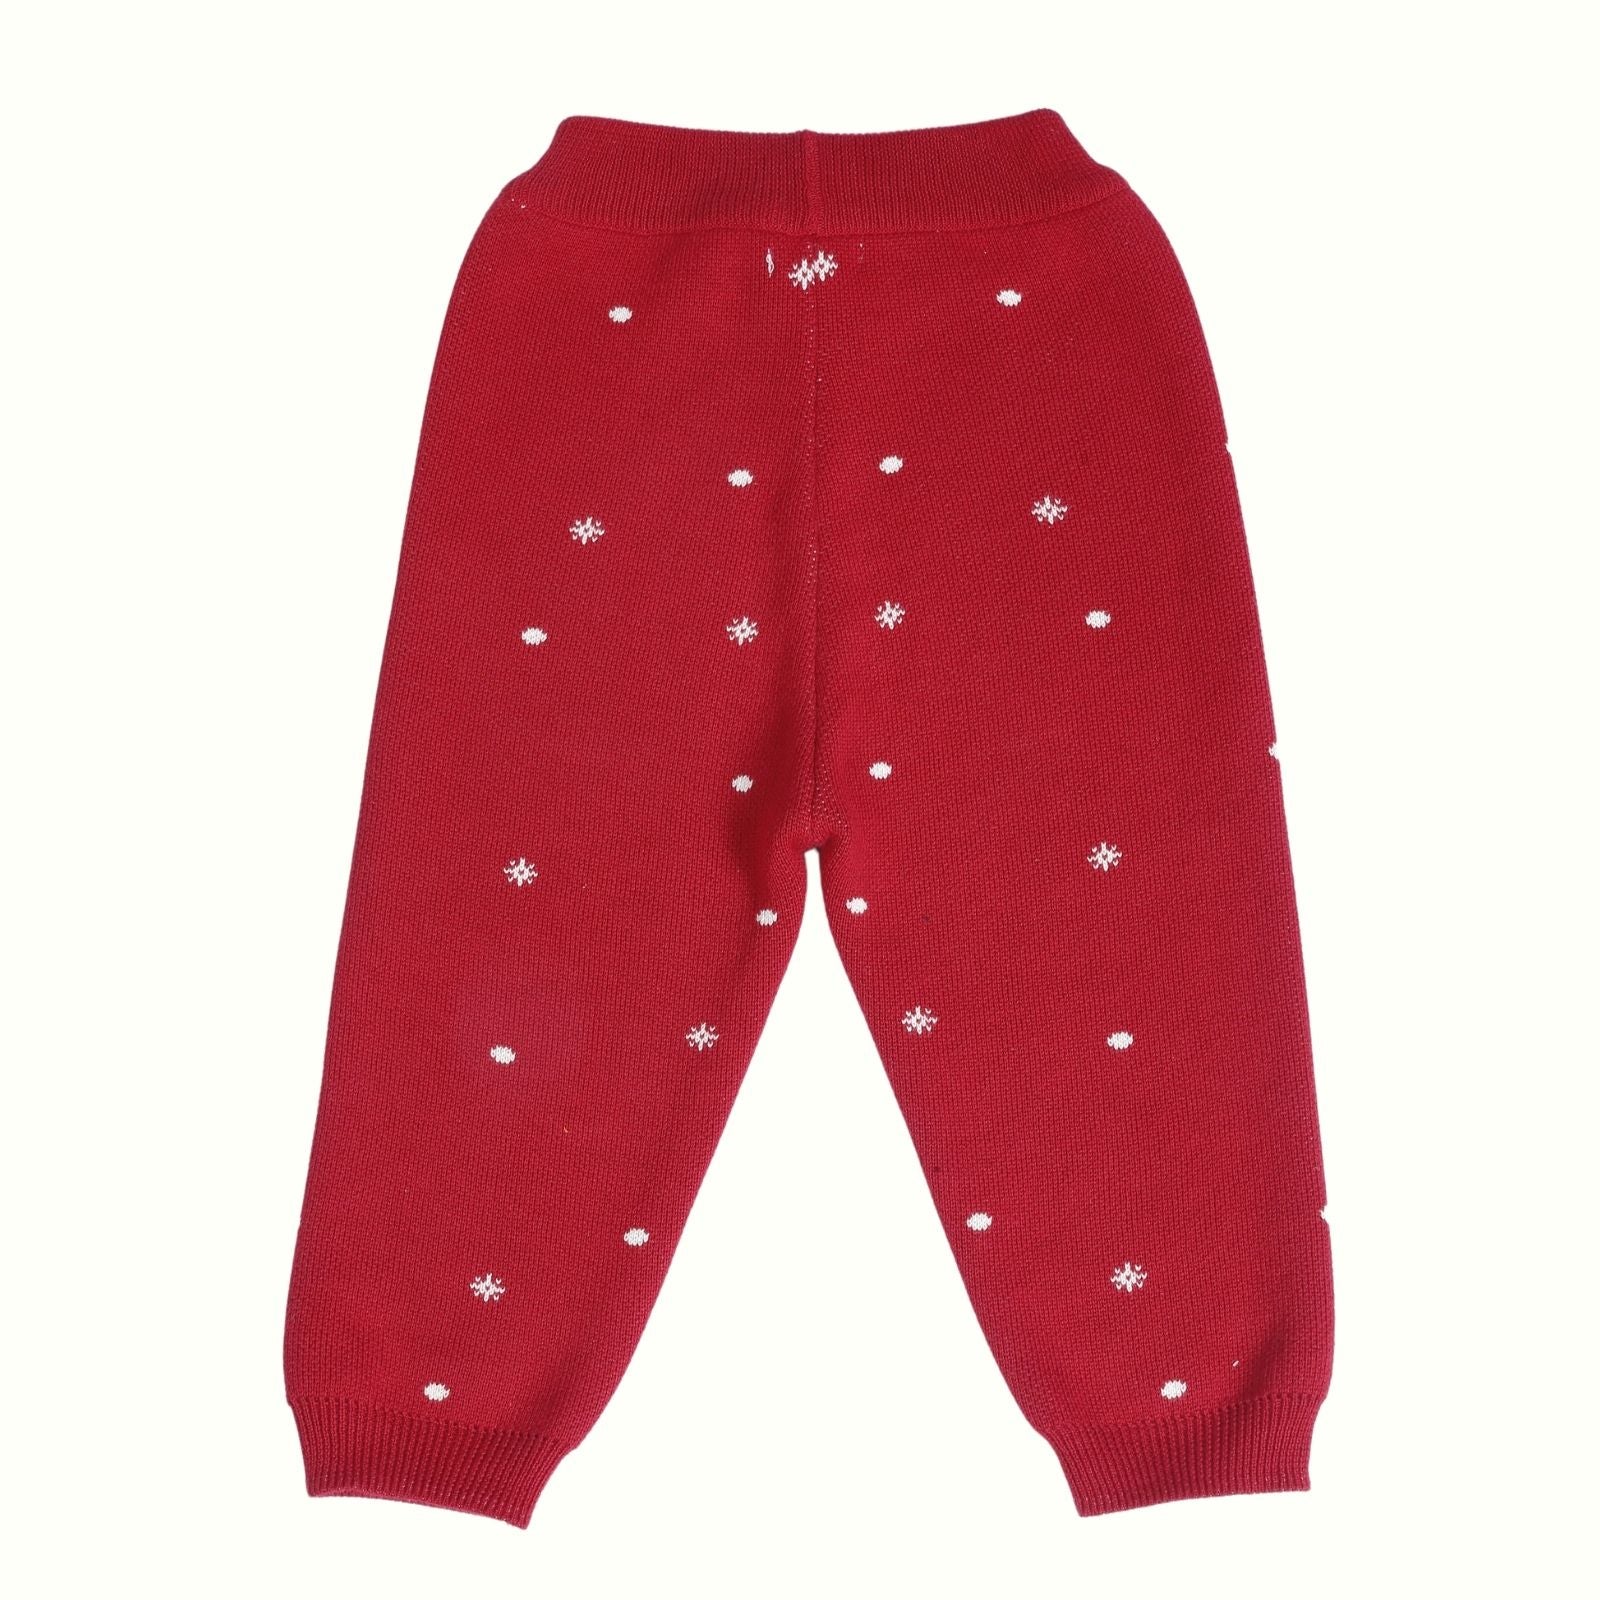 Greendeer Cherry Red Snow Fall Jacquard 100% Cotton Lower - Cherry Red